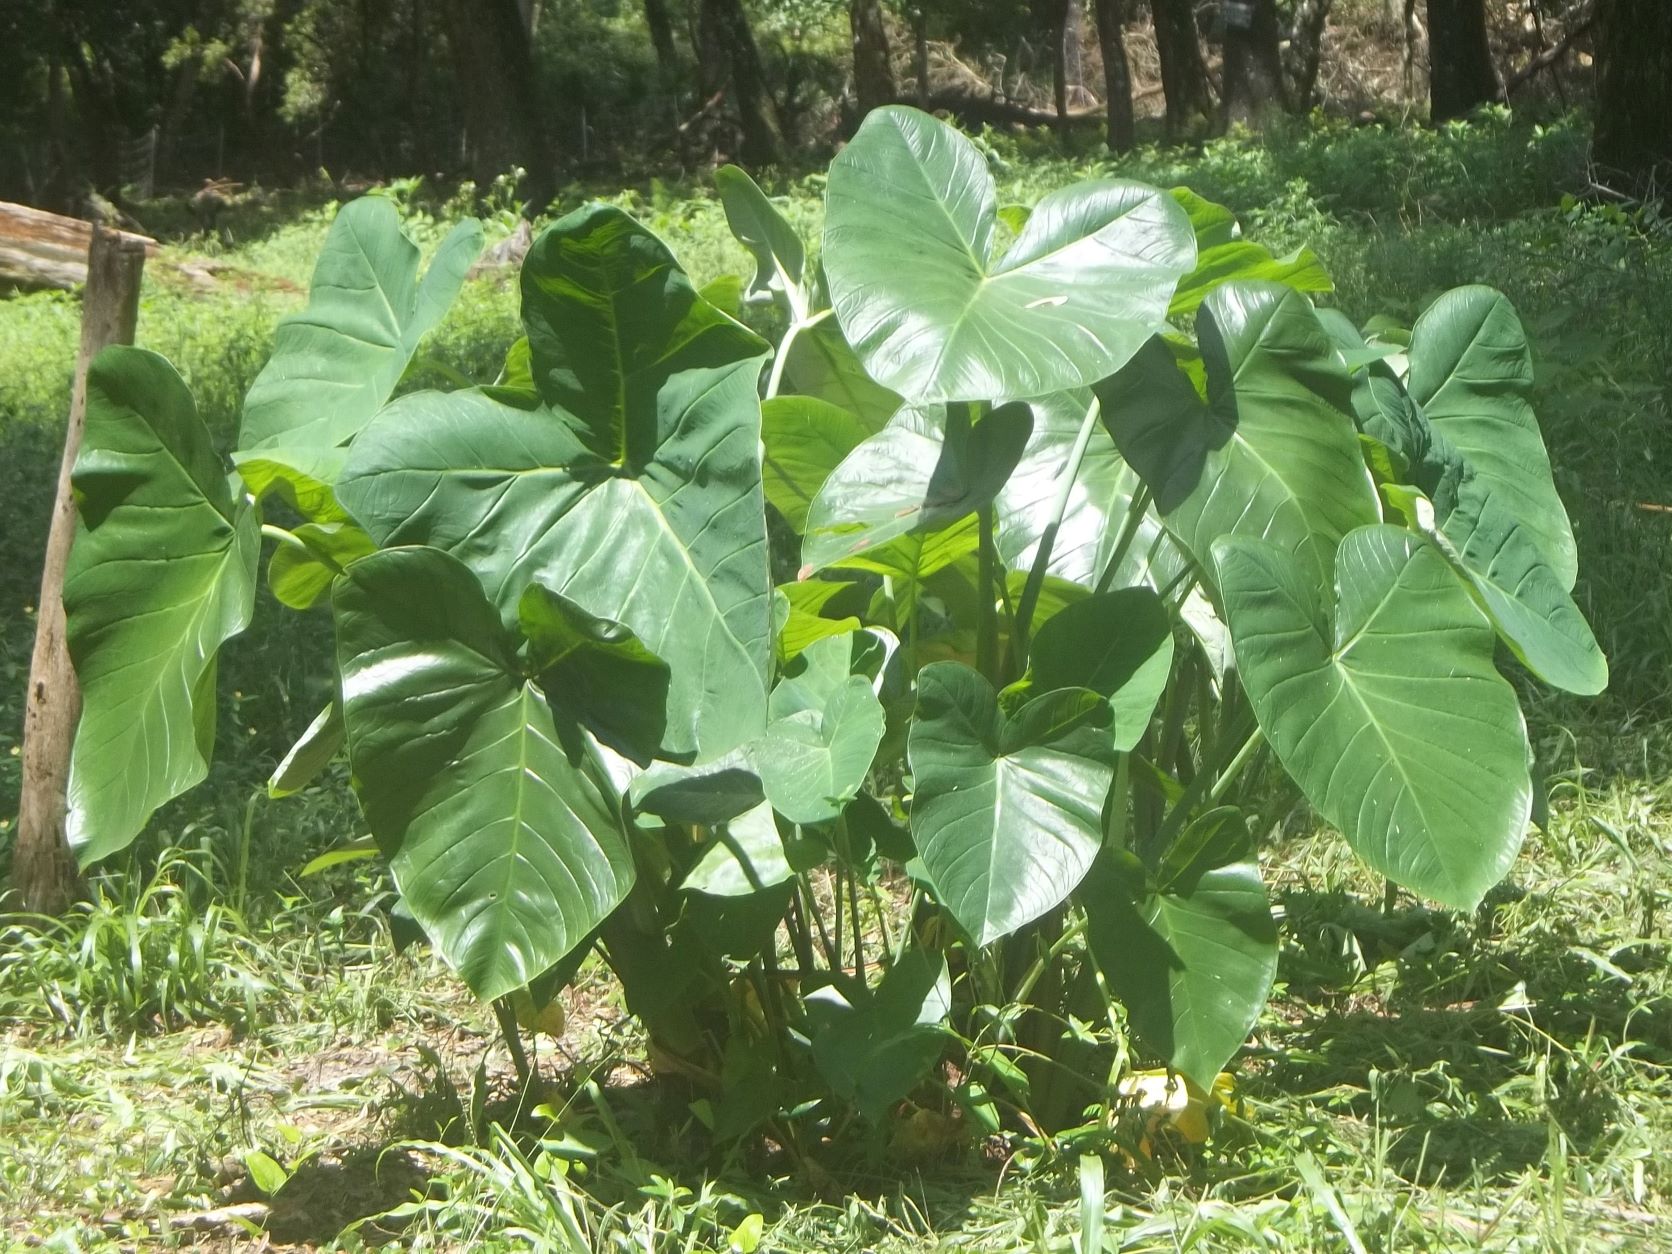 my elephant ear plant, likely a Xanthosoma species and the inspiration for the green challenge